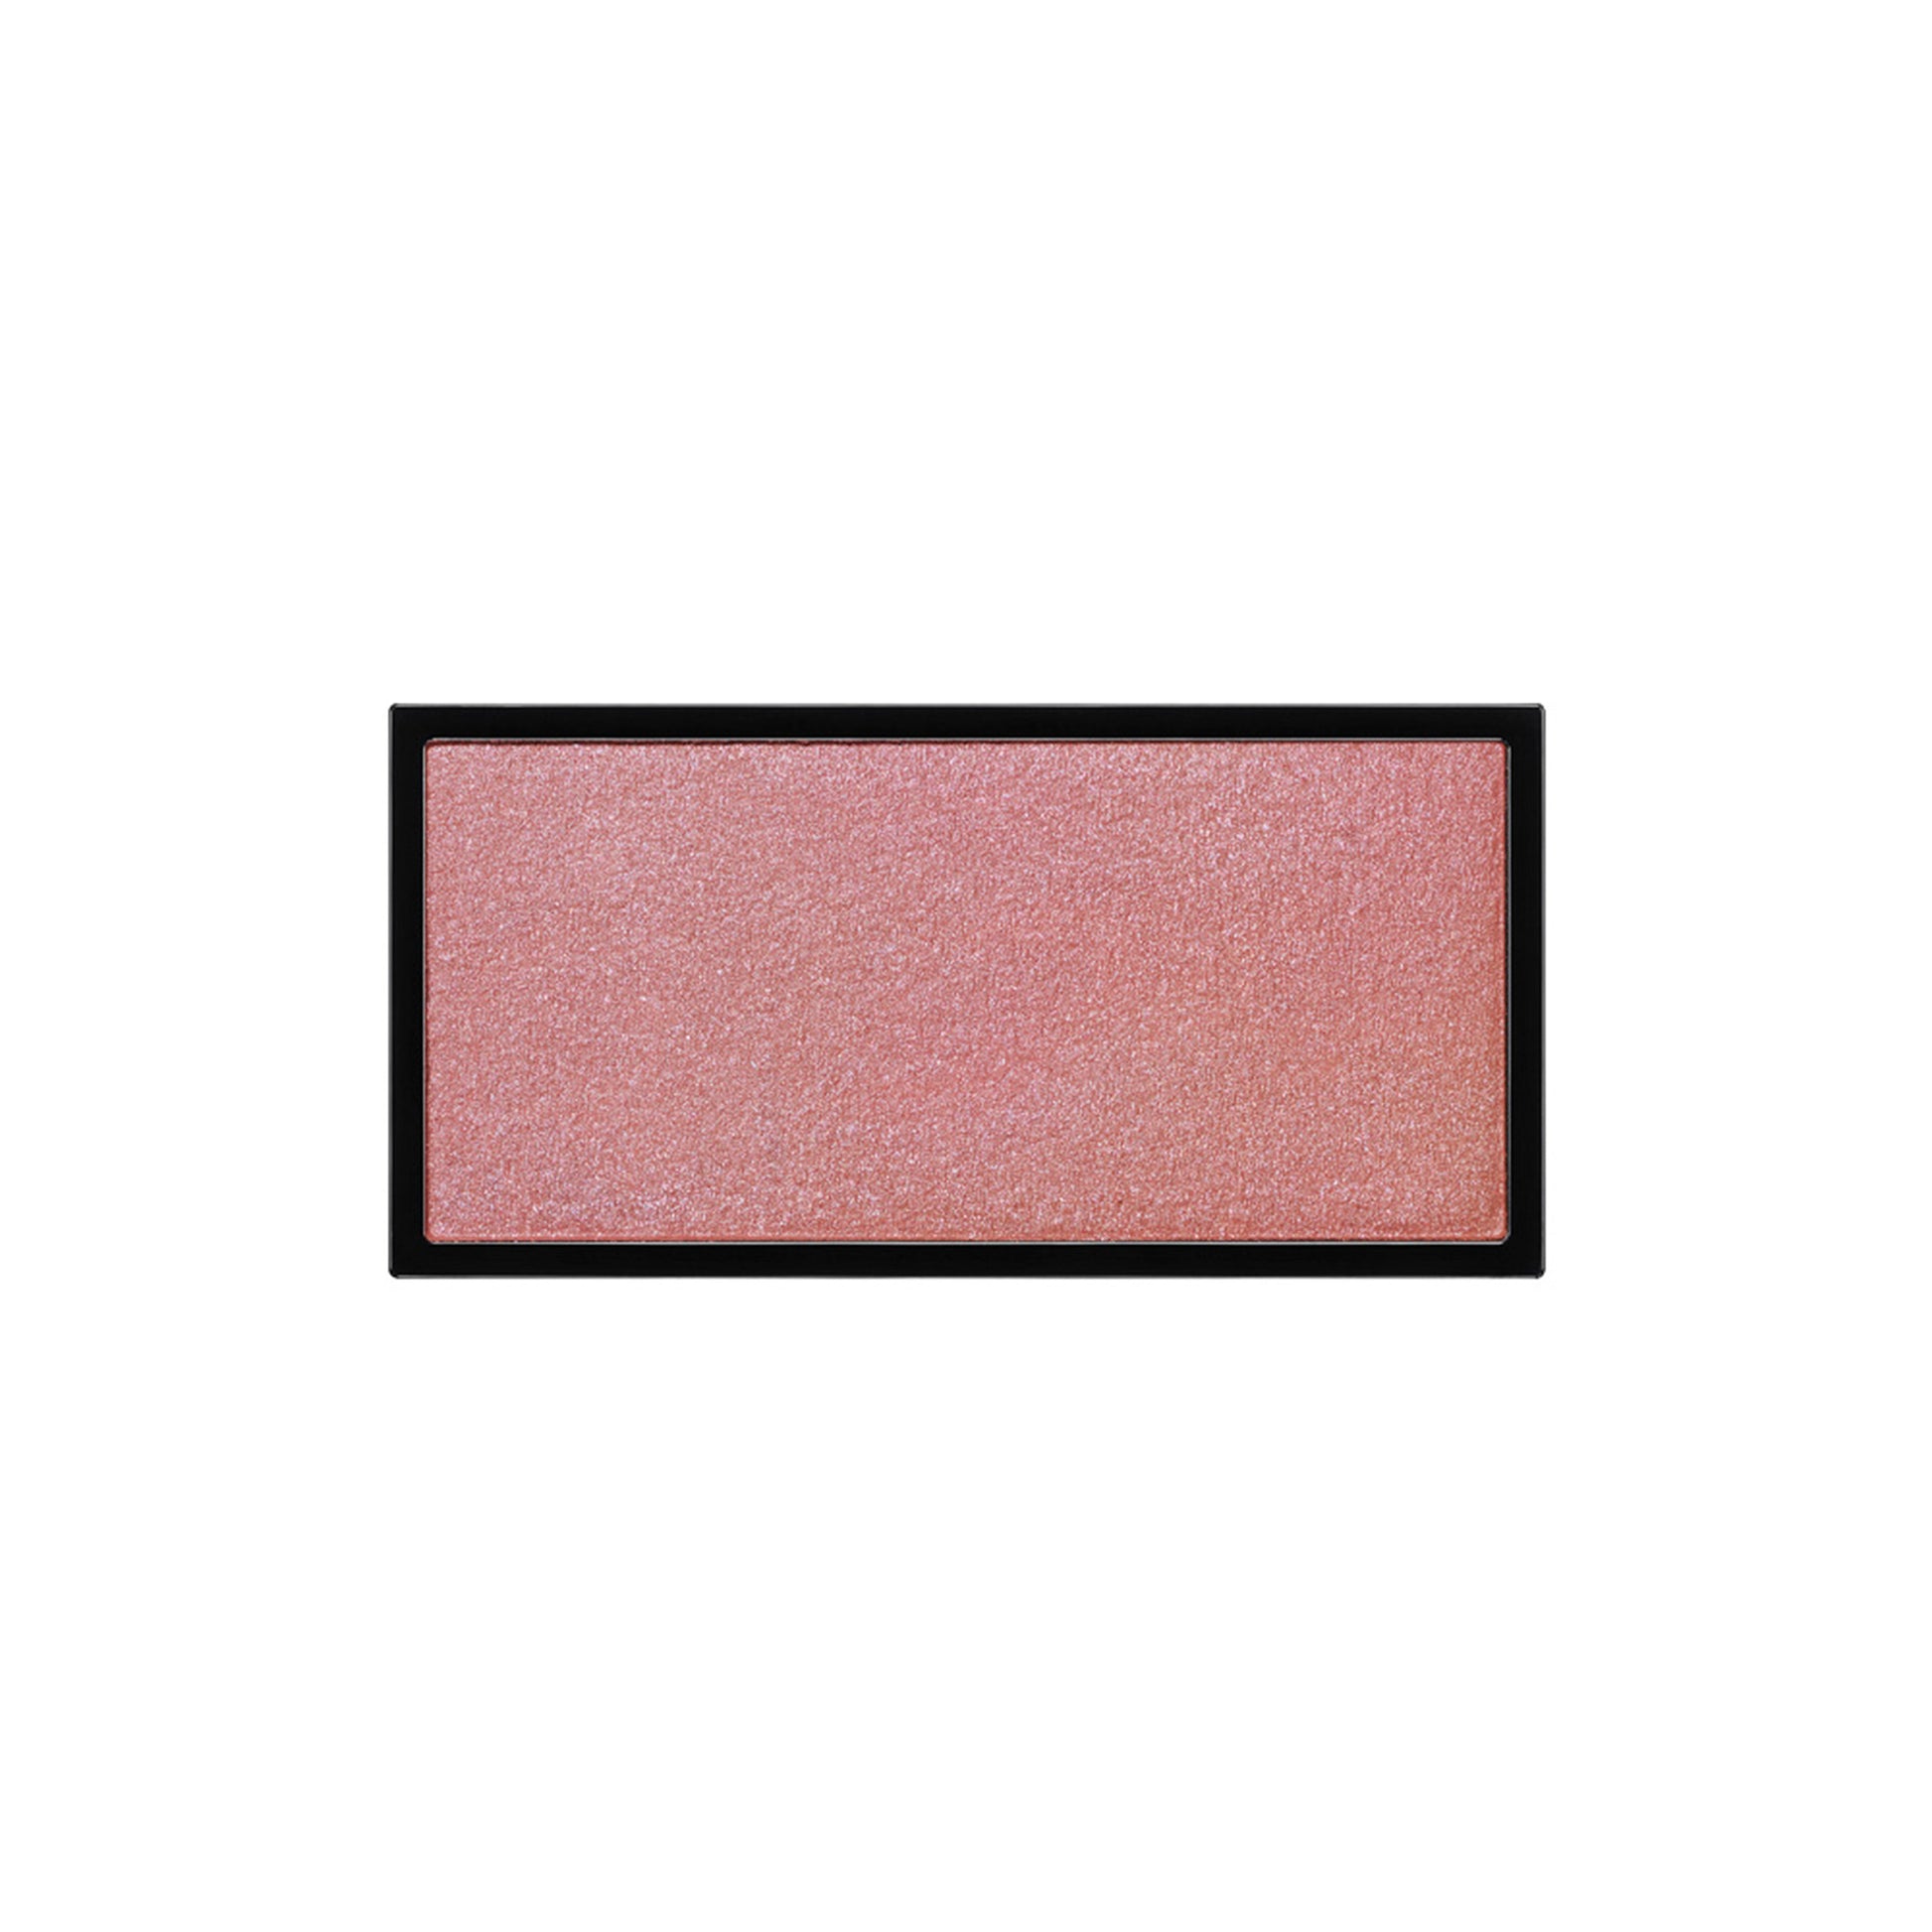 A rectangle shaped powder blush pan in a beige pink